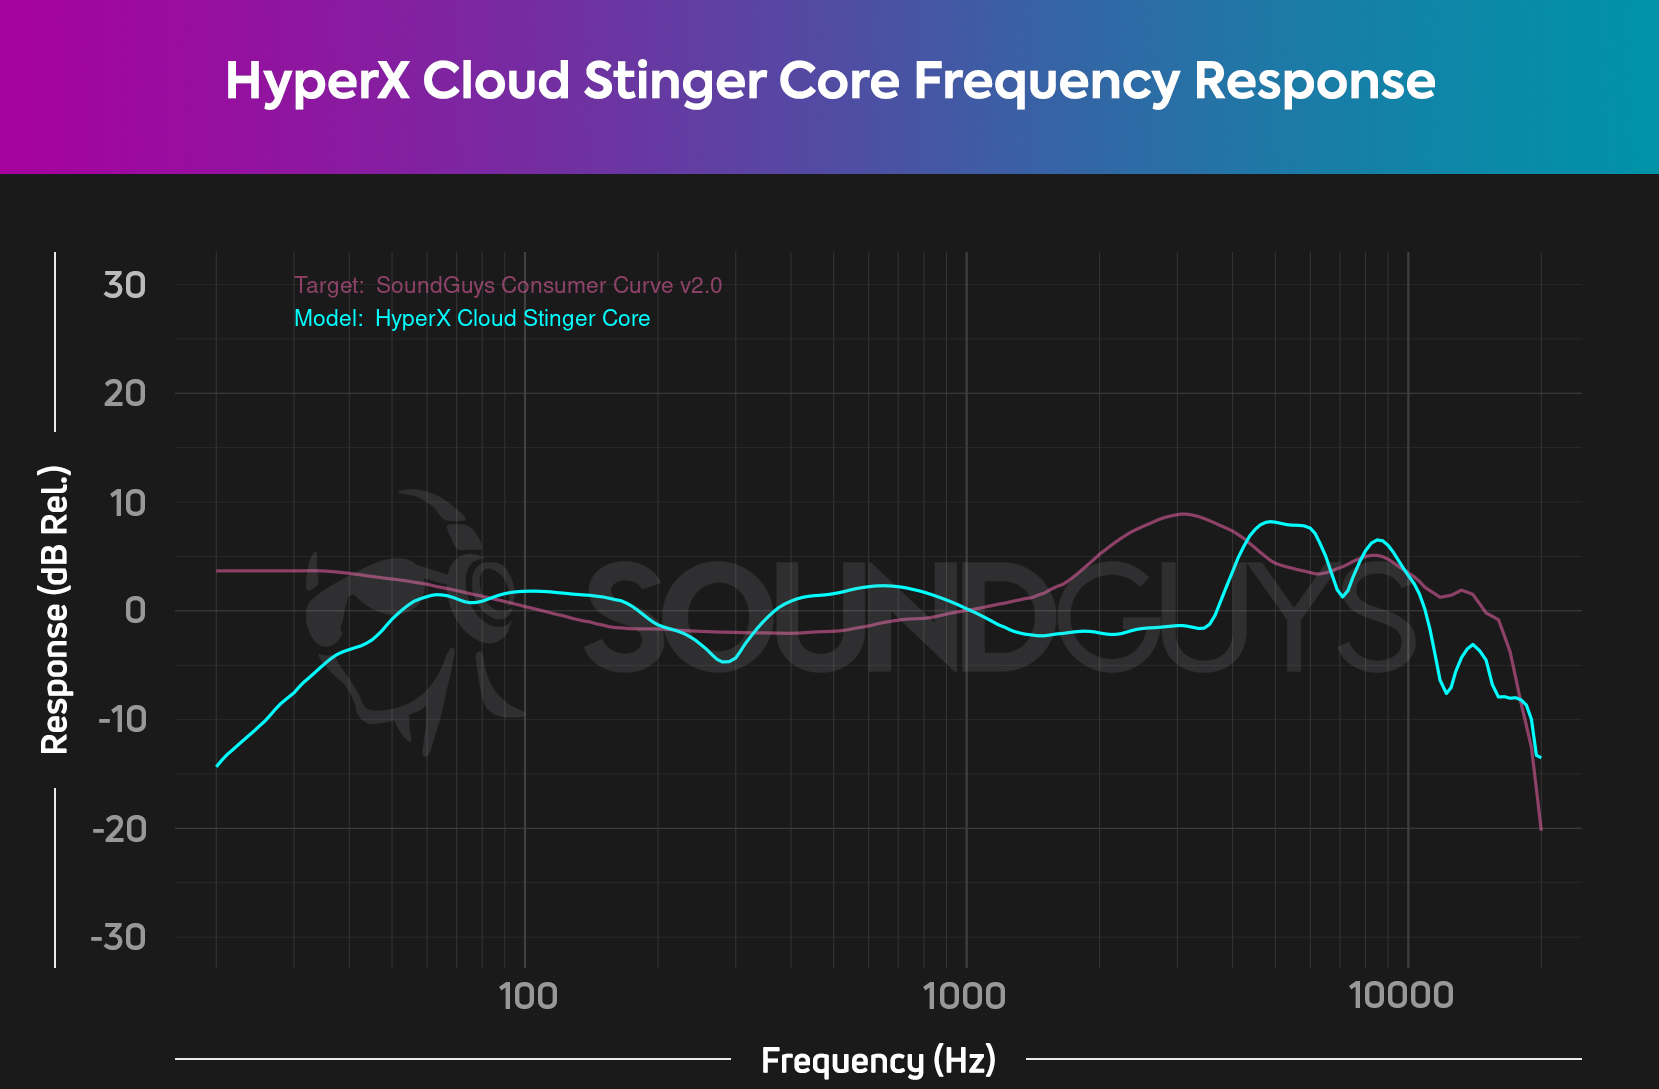 The frequency response chart for the HyperX Cloud Stinger Core depicts a notable under-emphasis from 1-2.5kHz.